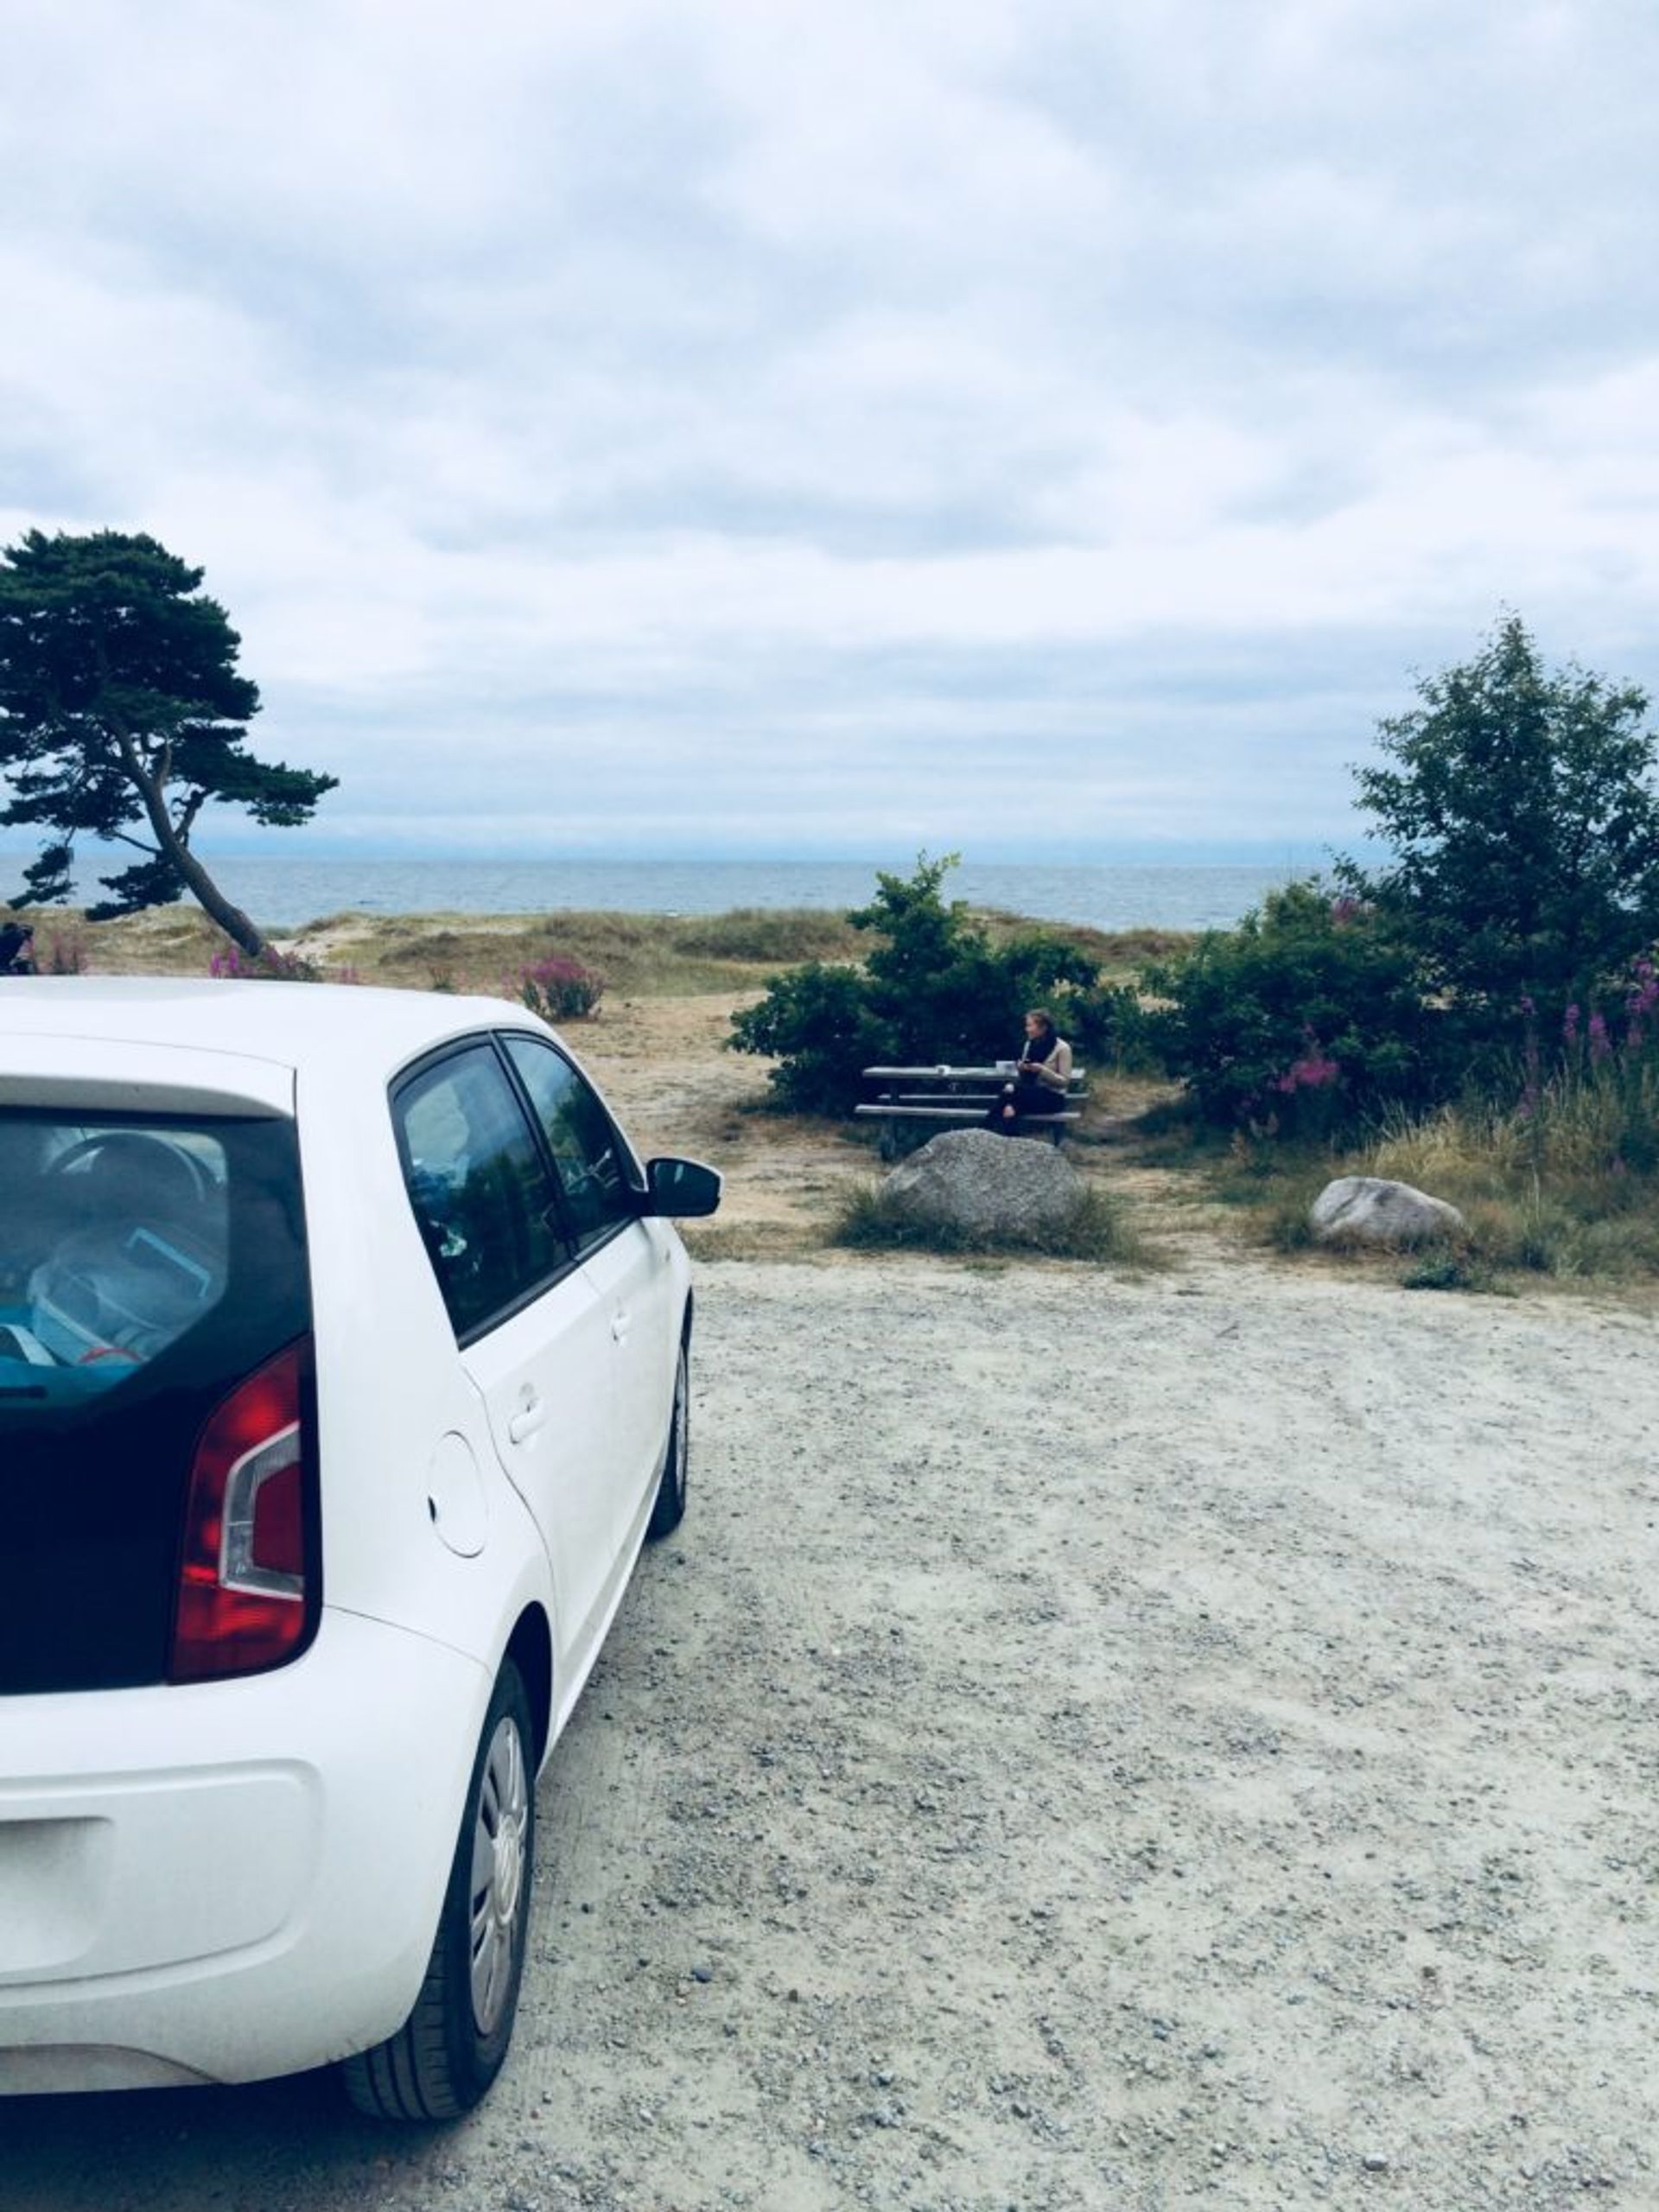 Car and beach in Sweden.